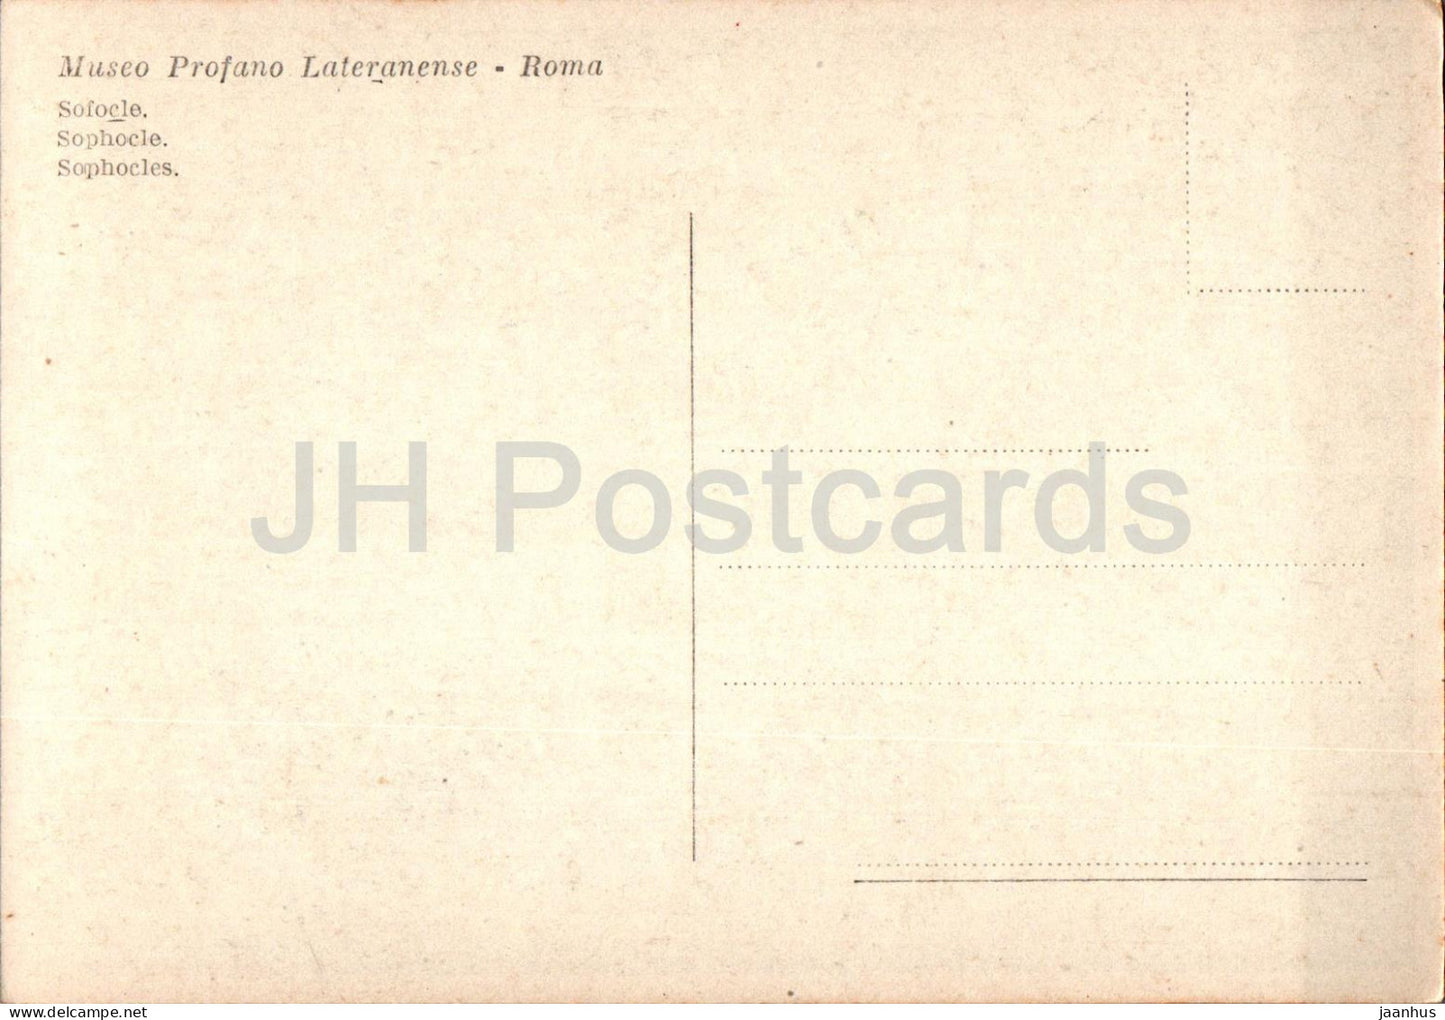 Roma - Museo Profano Lateranense - Sofocle - Sophocles - sculpture - old postcard - Italy - unused